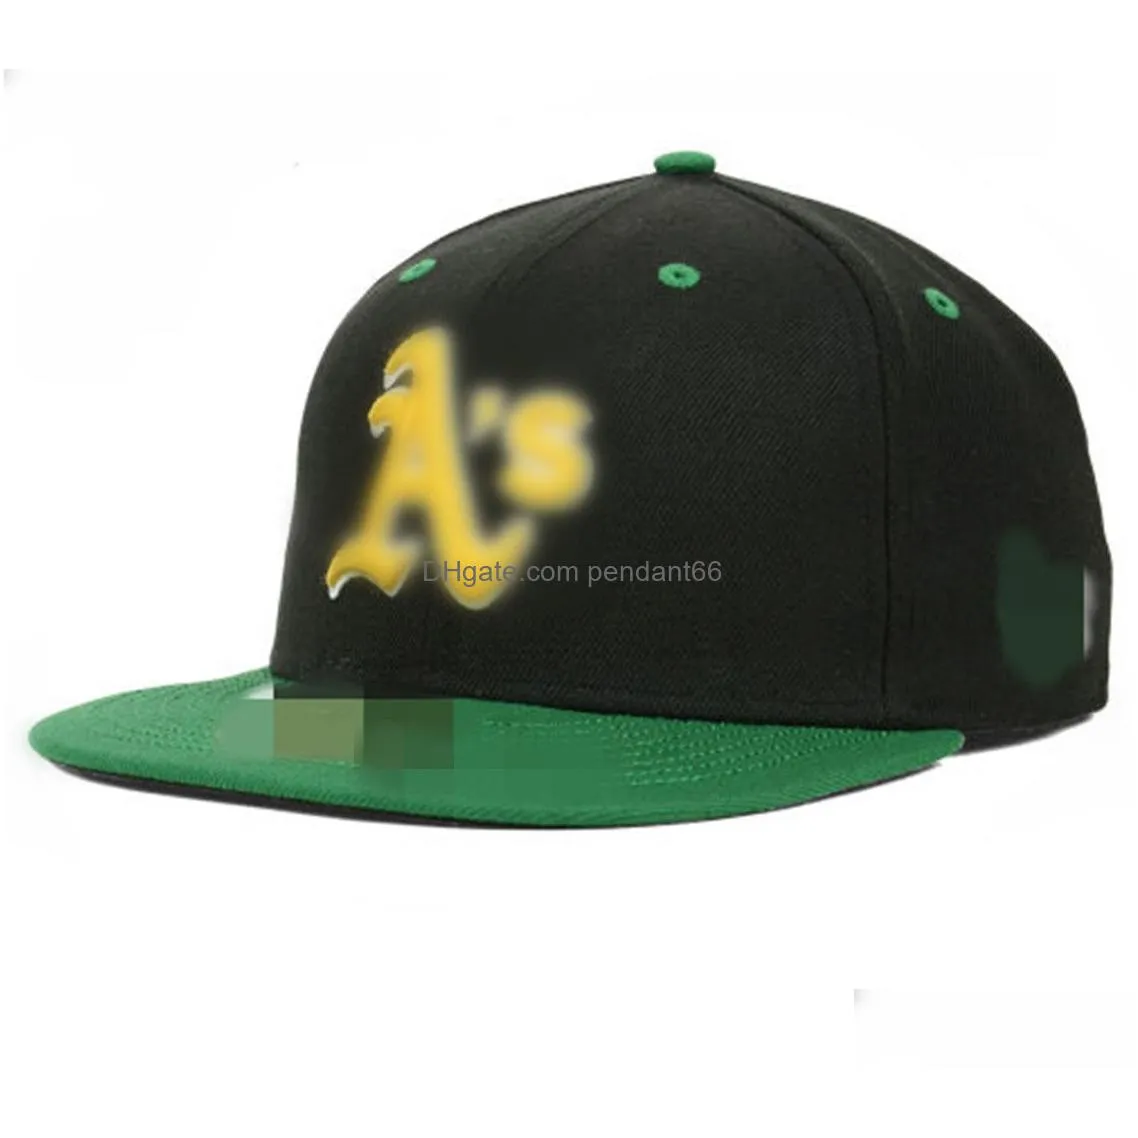 good quality athletics as letter baseball caps casual outdoor sports casquette for men women wholesale fitted hats h6-7.14